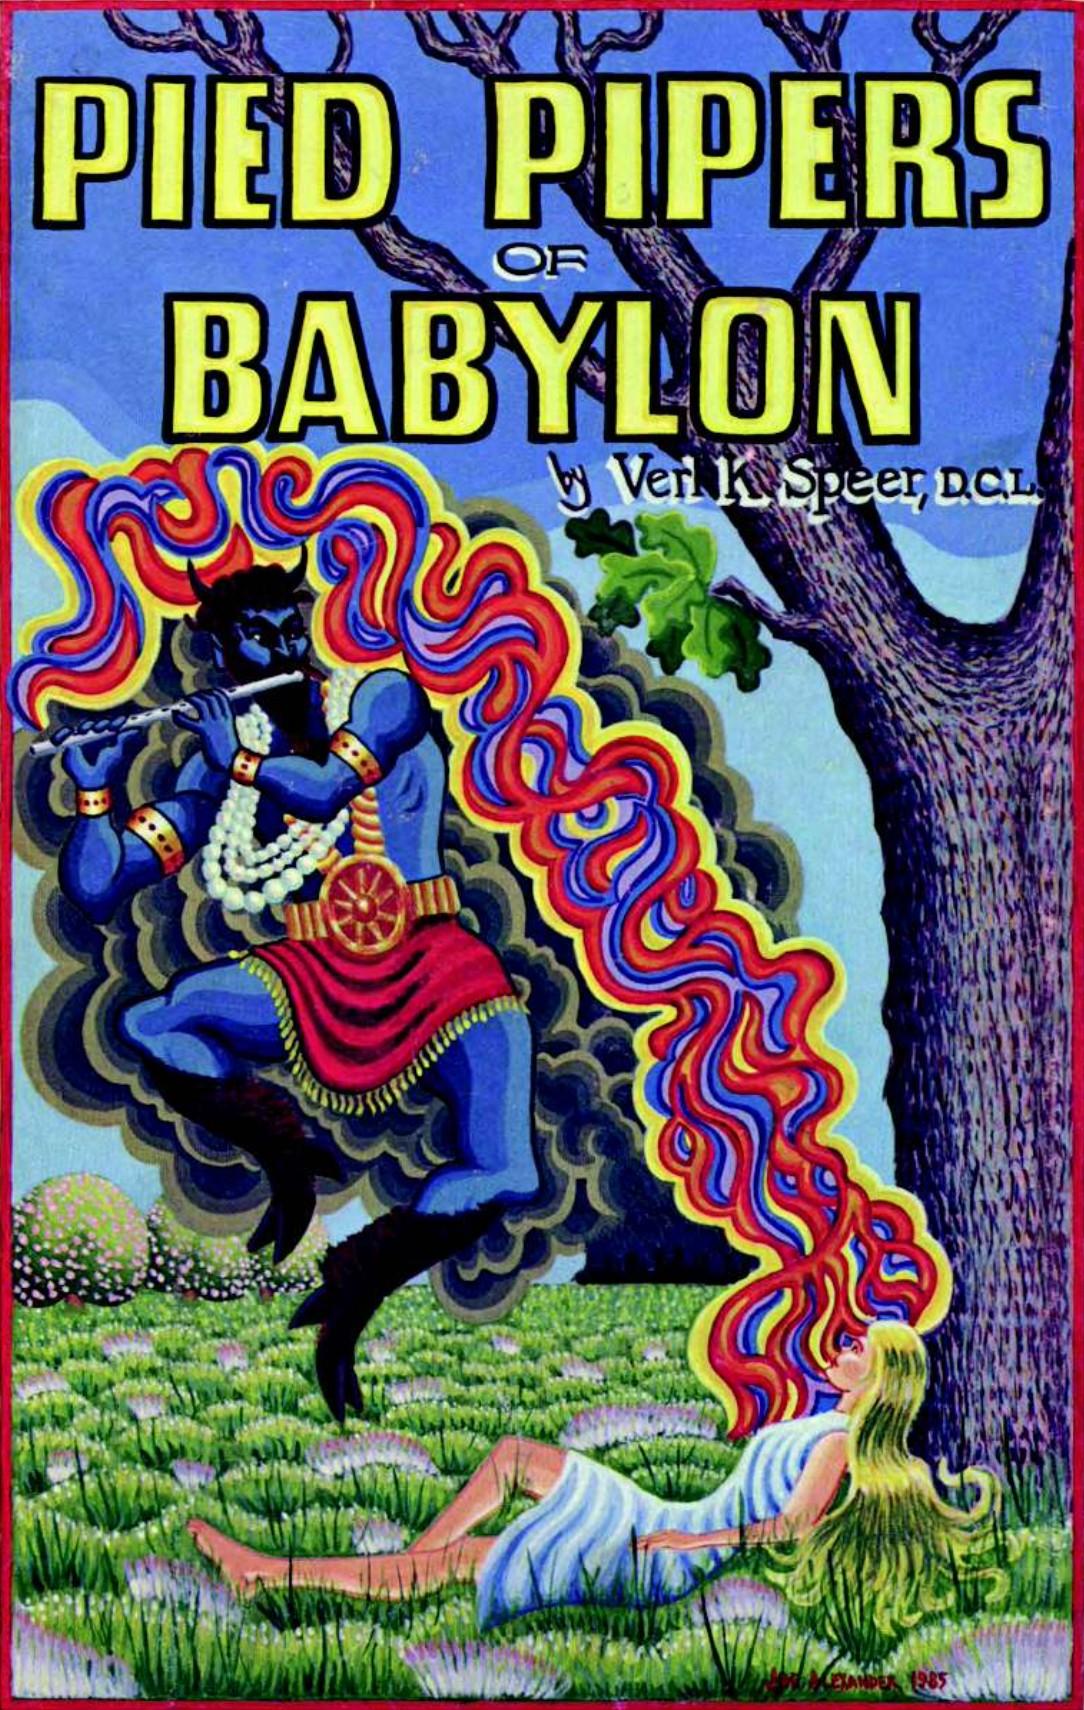 Pied Pipers of Babylon (1985) by Verl K. Speer